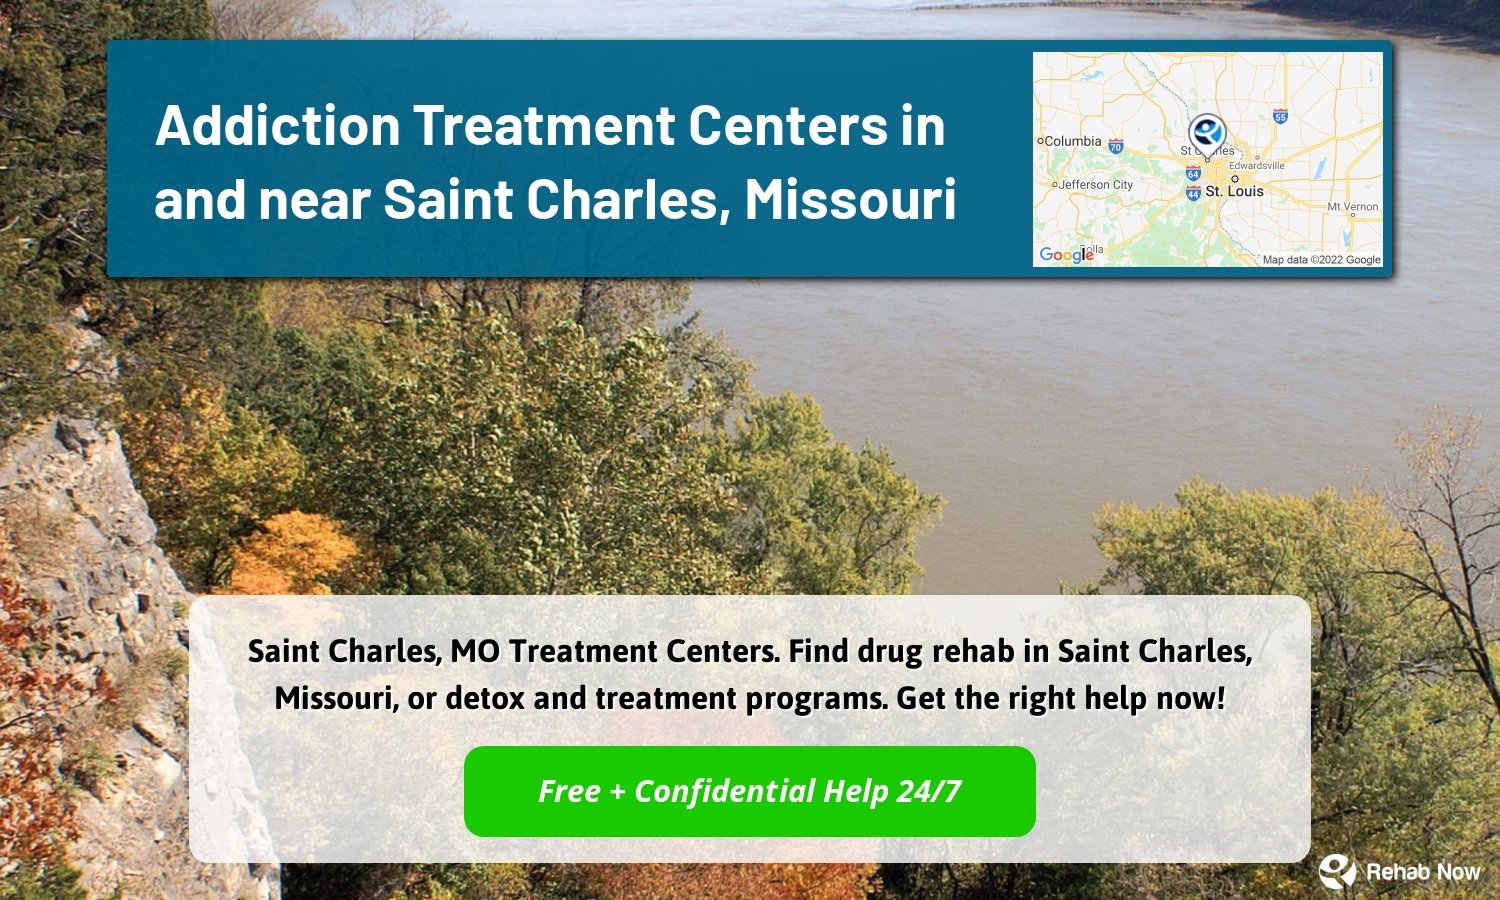 Saint Charles, MO Treatment Centers. Find drug rehab in Saint Charles, Missouri, or detox and treatment programs. Get the right help now!